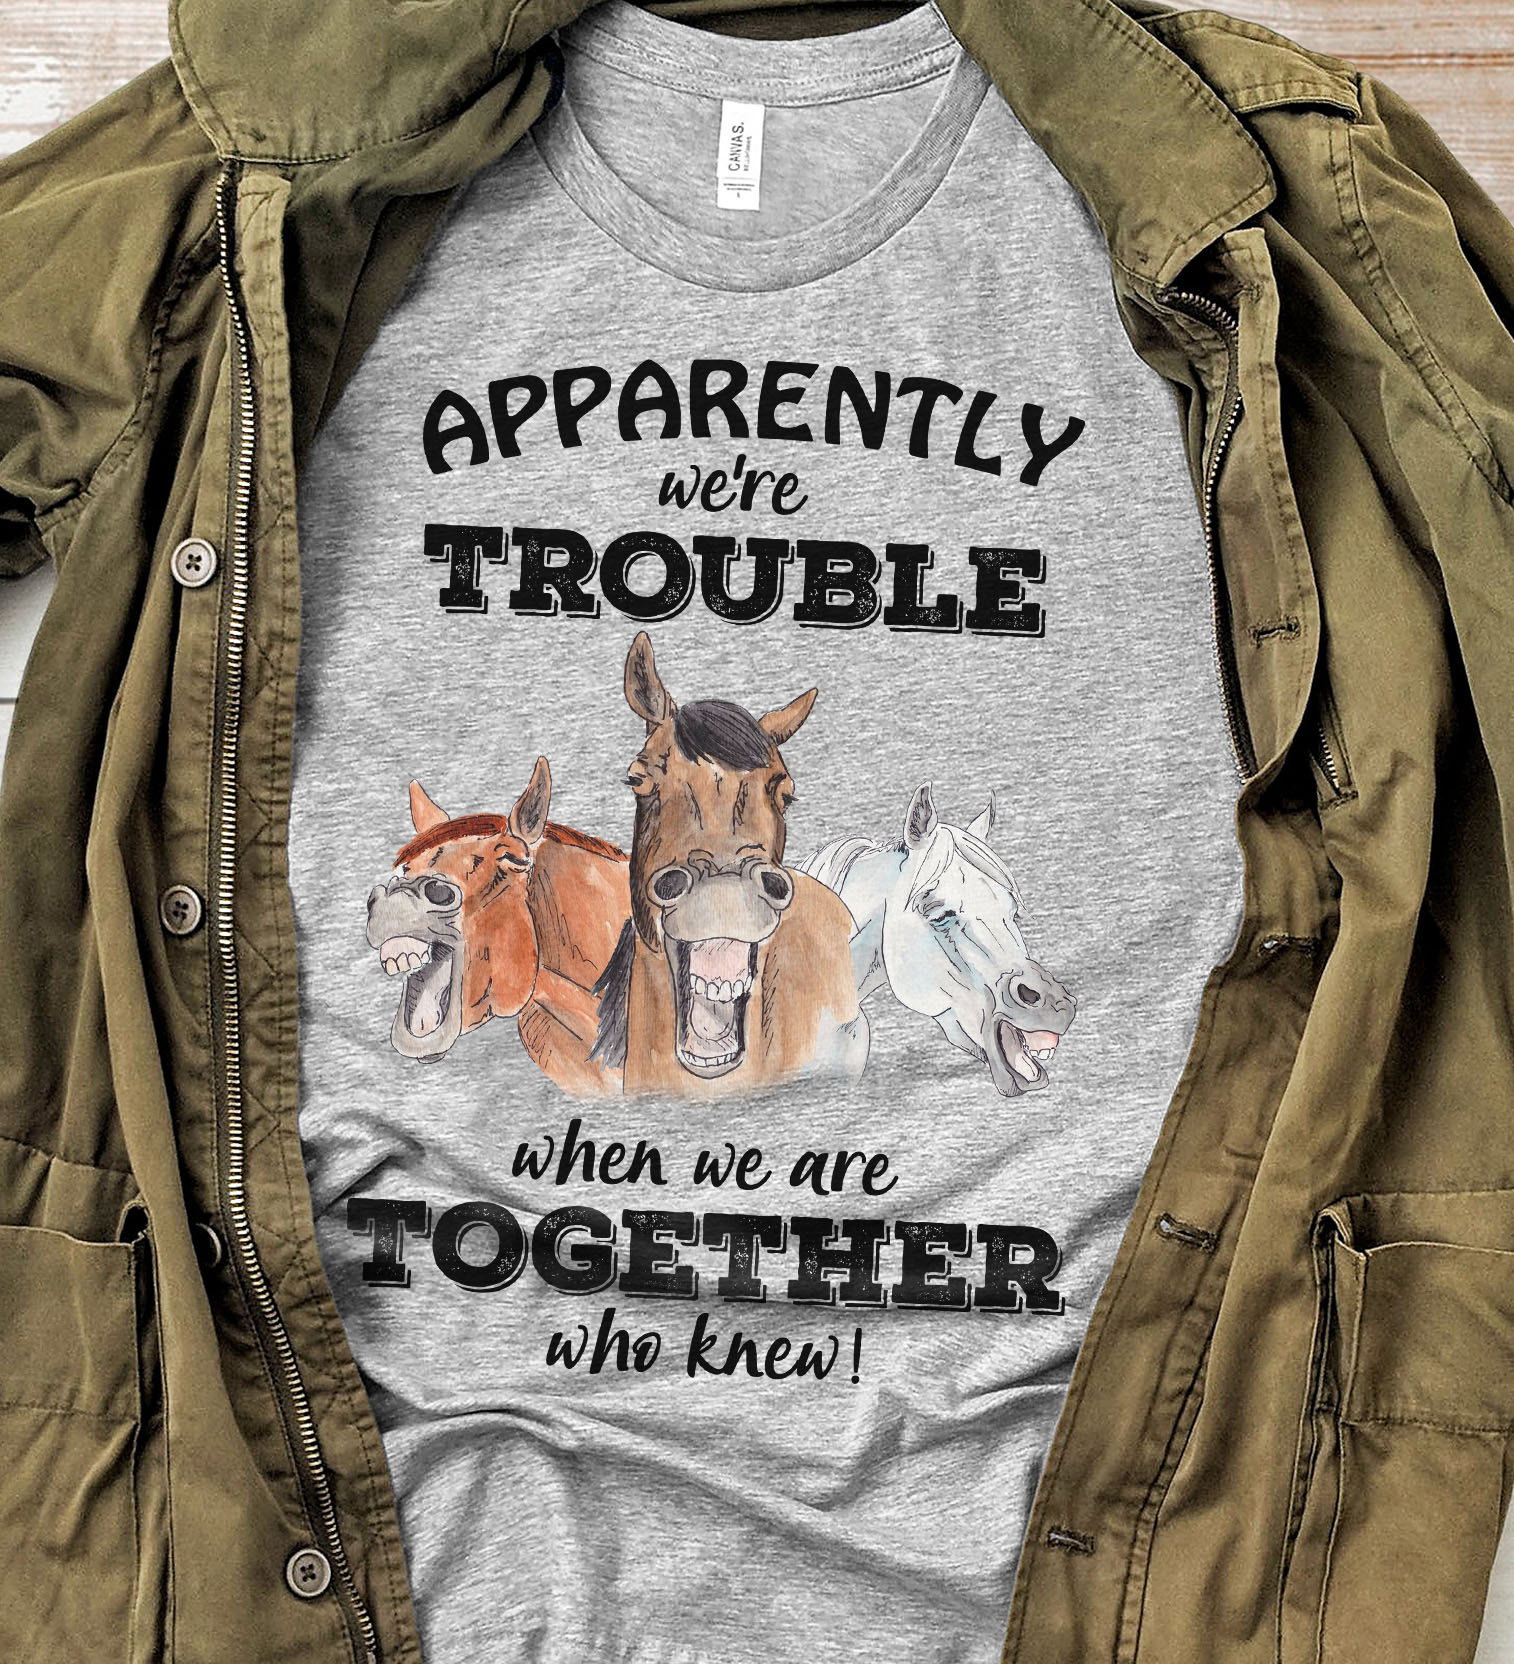 Apparently we're trouble when we are together who knew - Grumpy horses